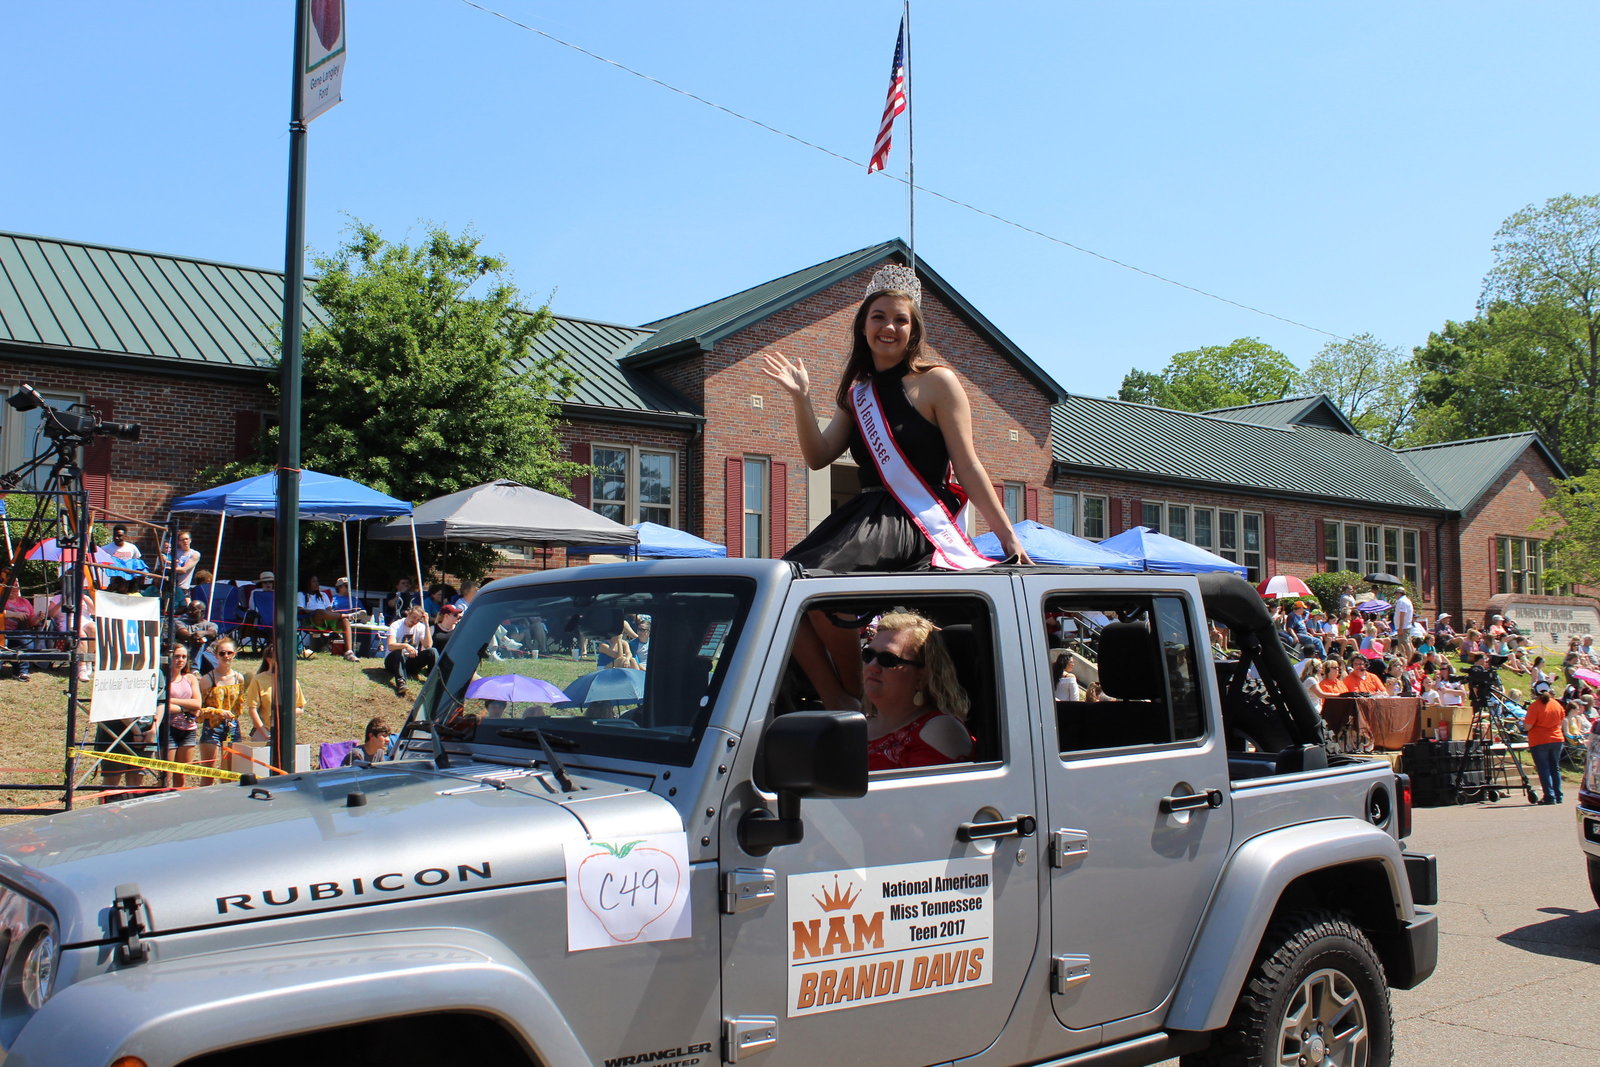 West Tennessee Strawberry Festival - Humboldt TN - Girls Parade20